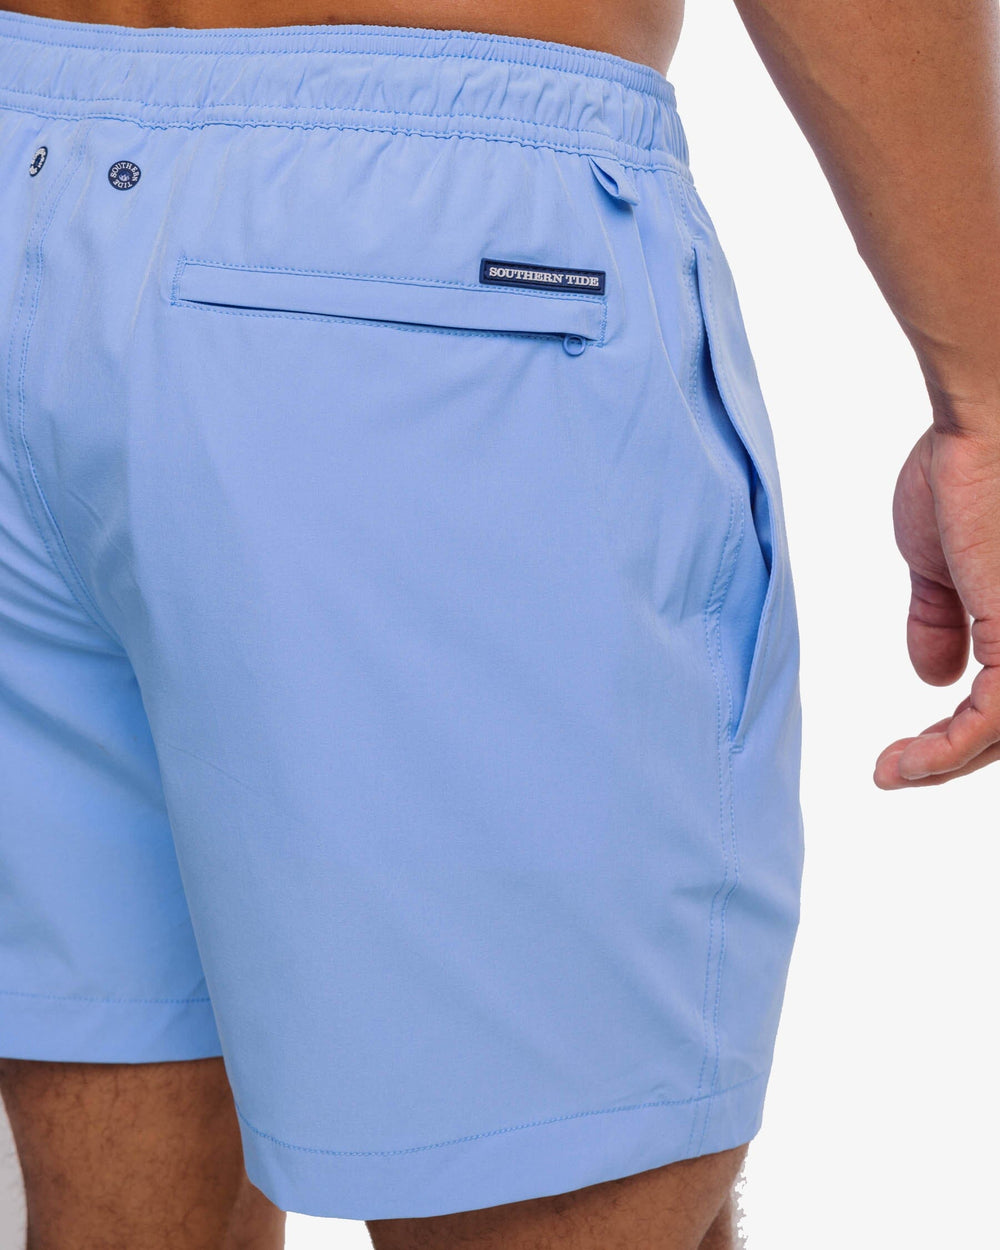 The detail view of the Southern Tide Solid Swim Trunk 3 by Southern Tide - Ocean Channel